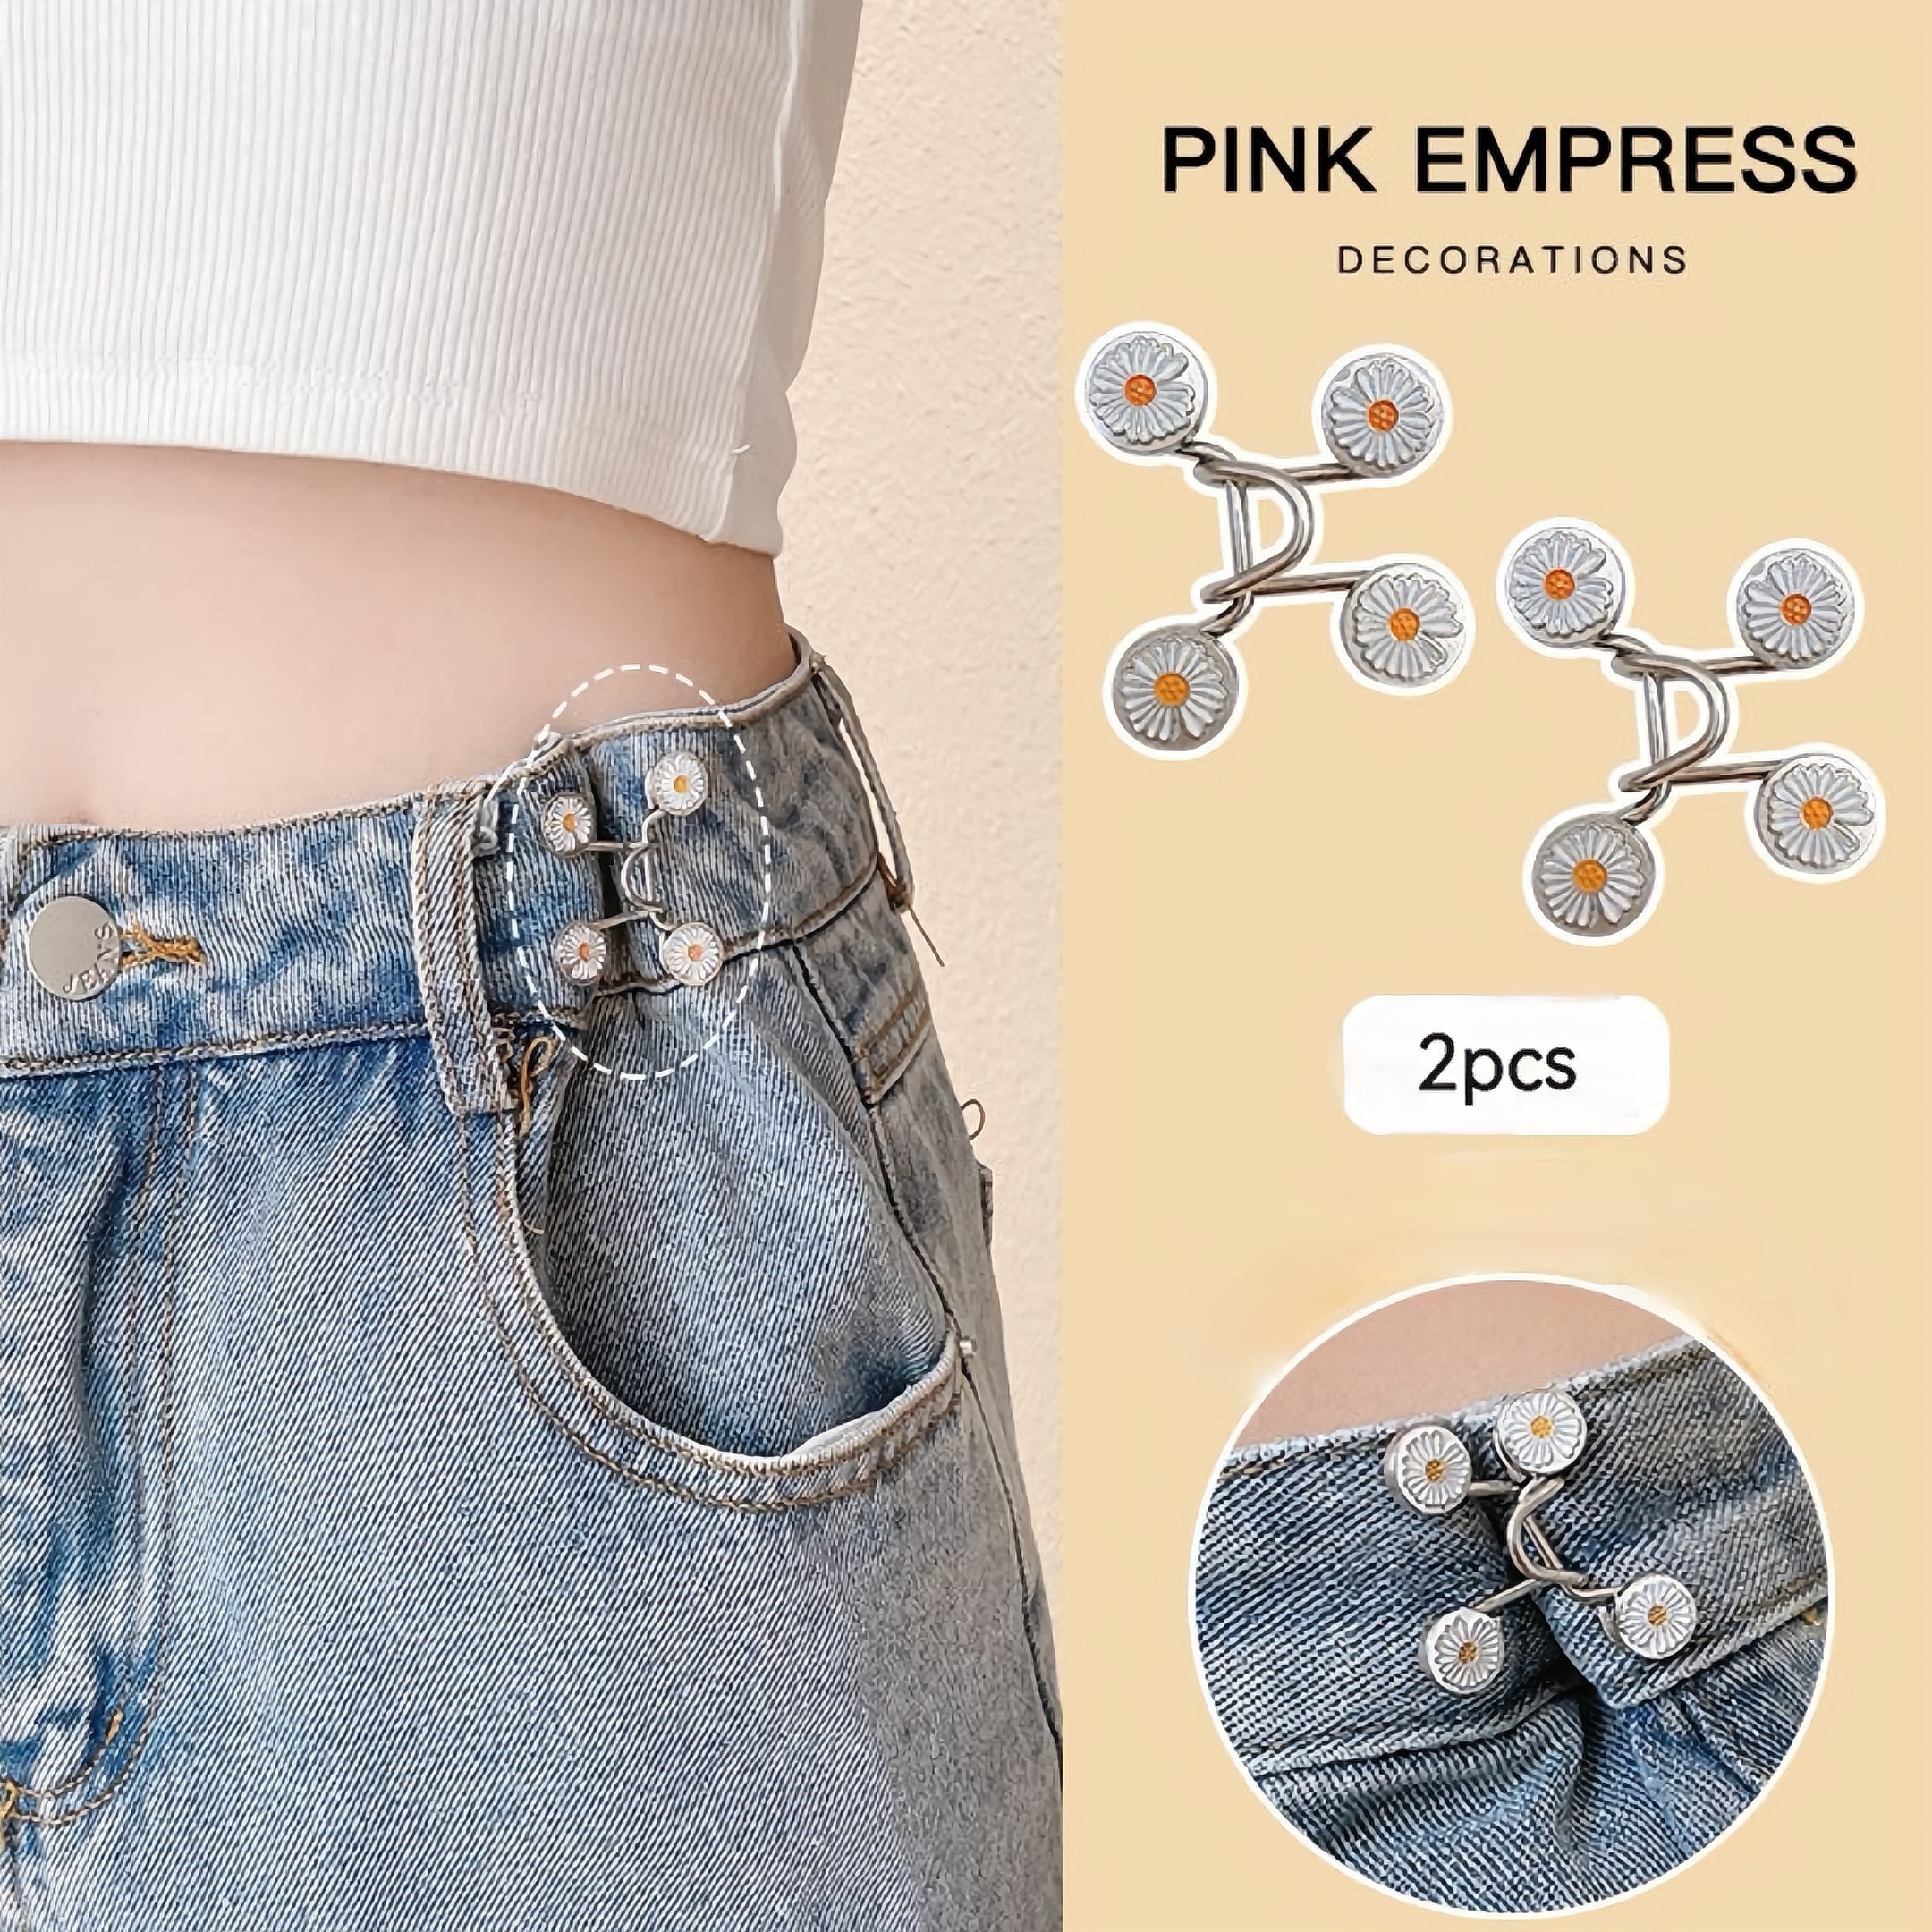 Pants Jeans Waist Change Safety Pins, Waist Brooch Clips